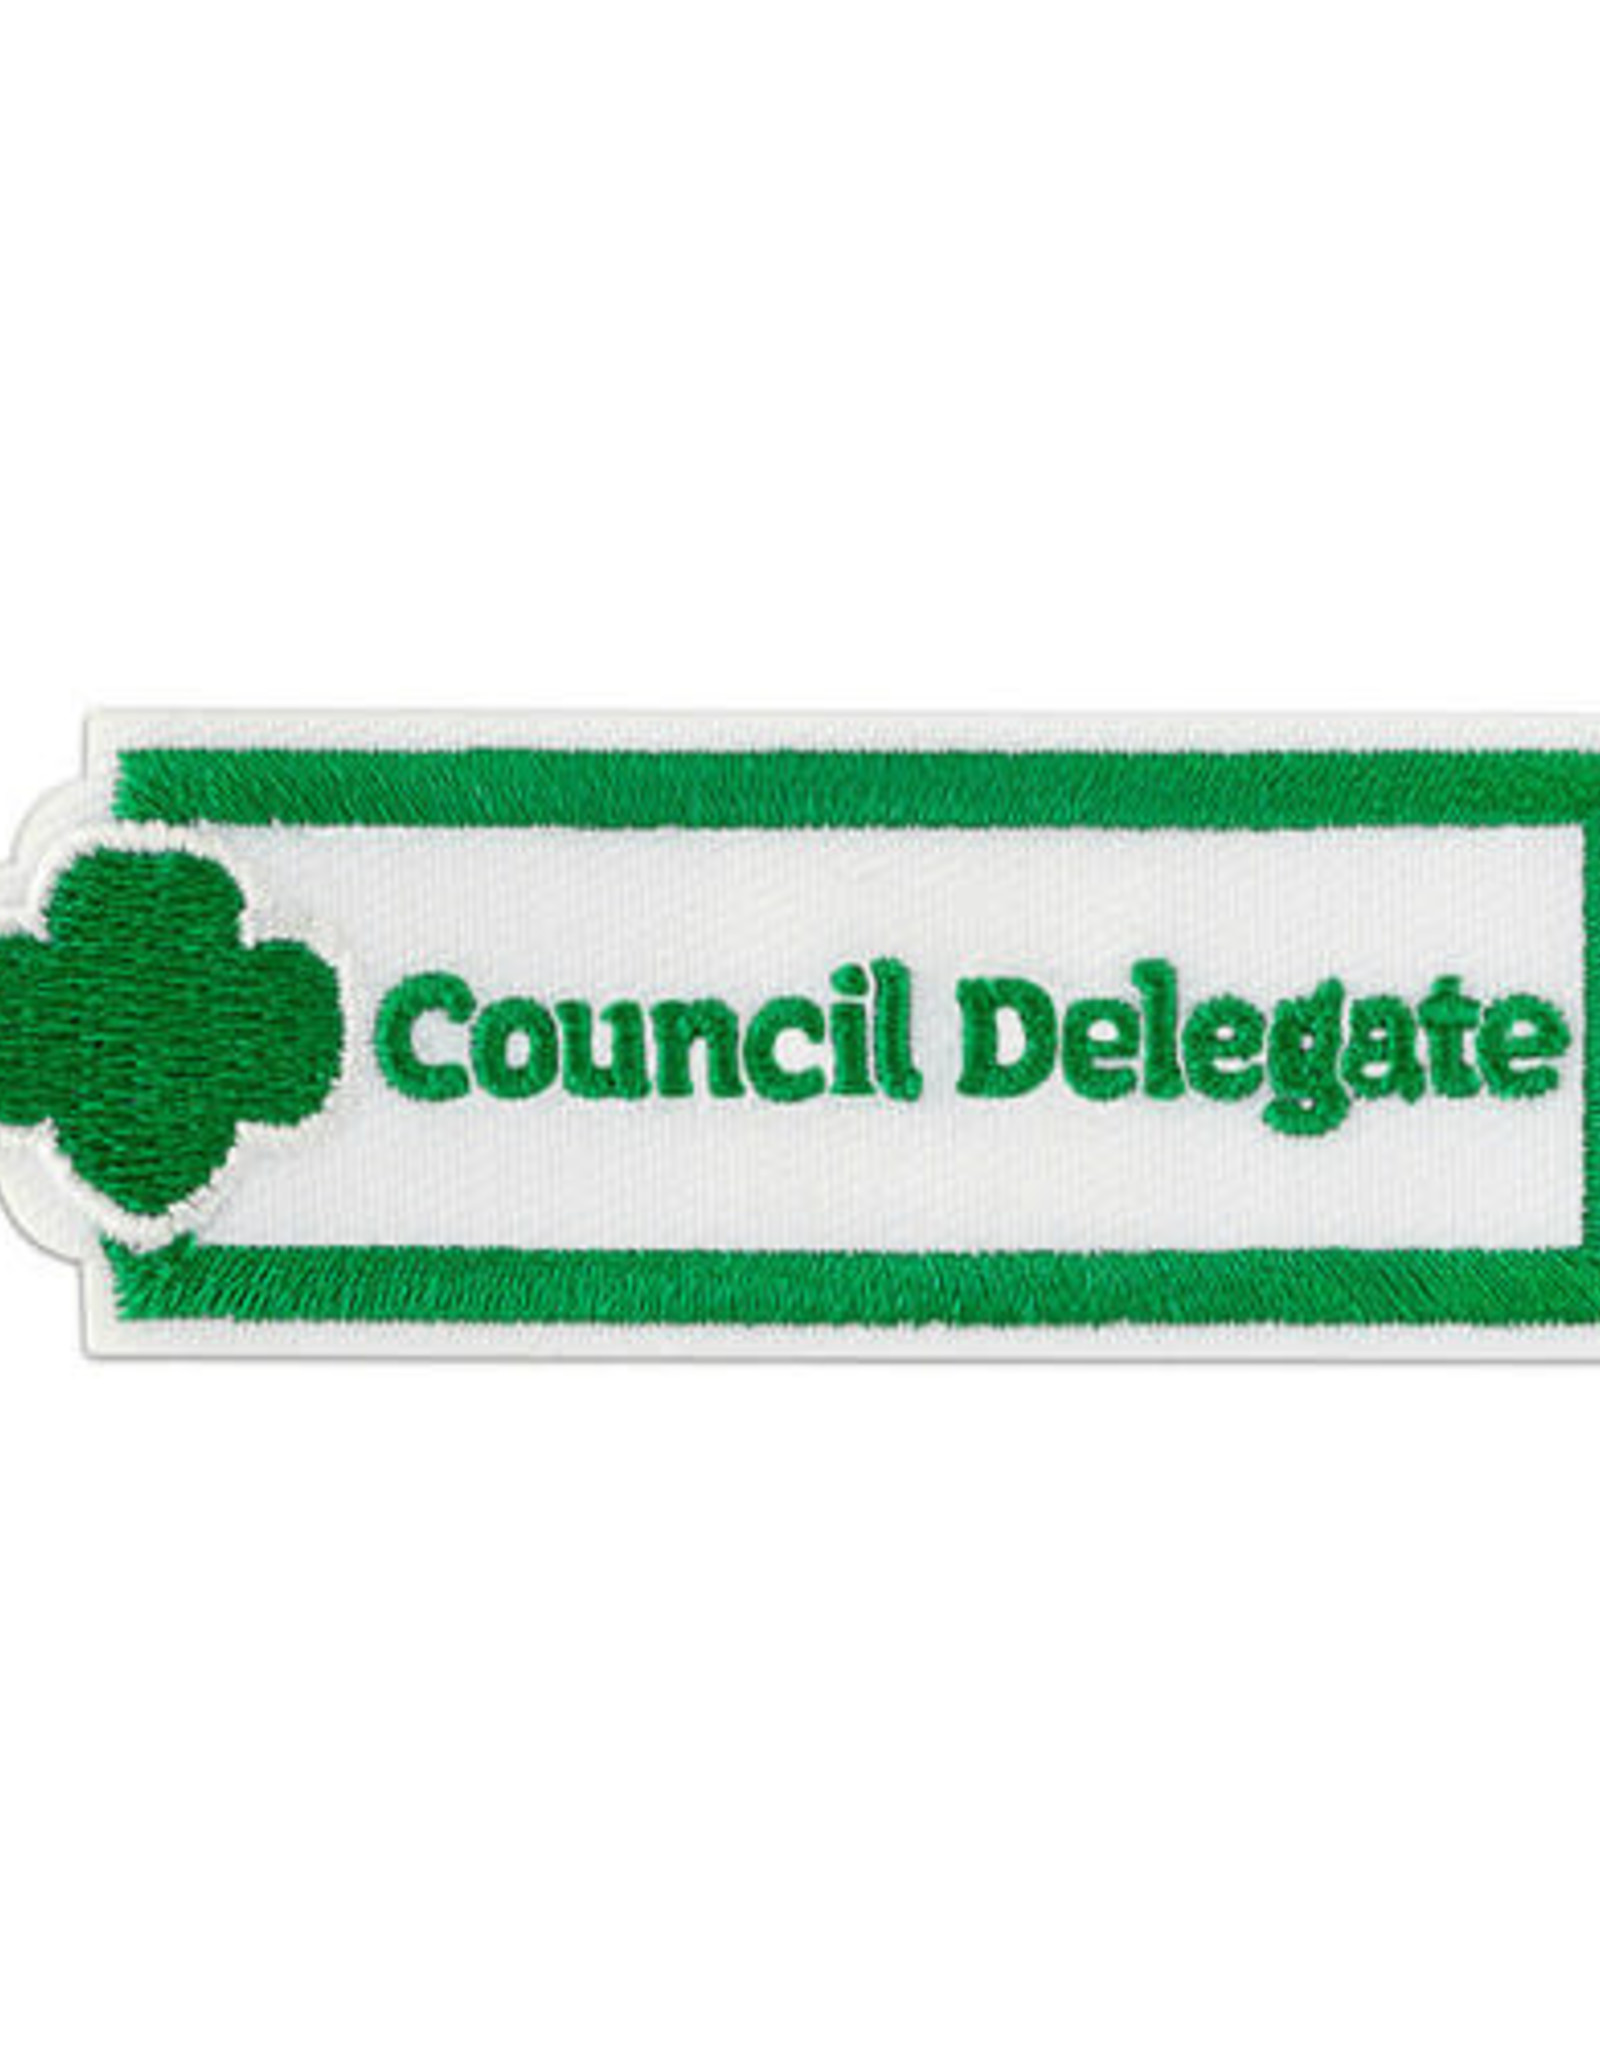 GIRL SCOUTS OF THE USA Council Delegate Adult Achievement Patch